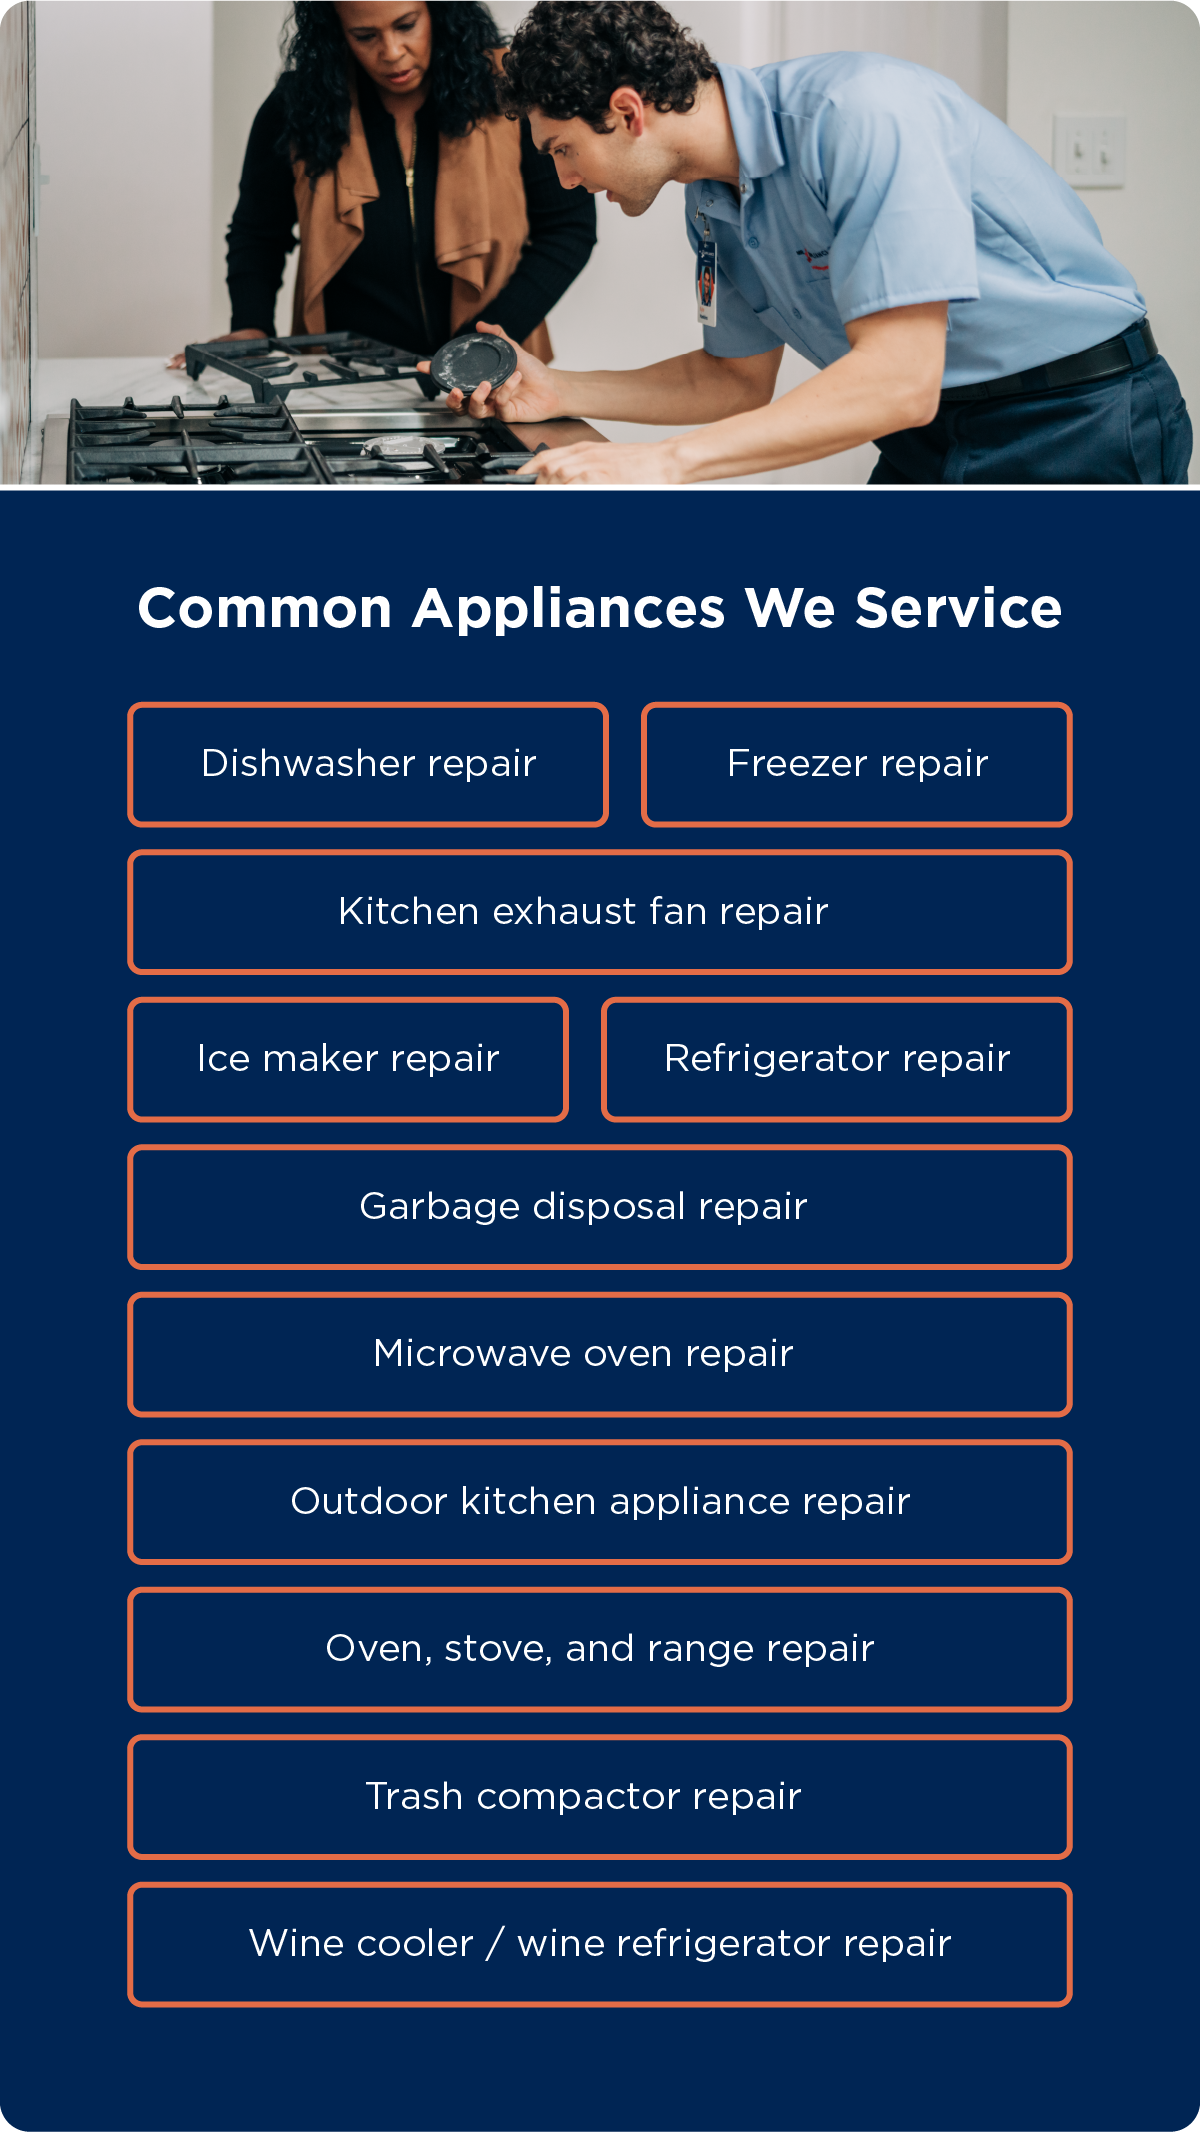 Common kitchen appliances Mr. Appliance services include refrigerators and freezers, dishwashers, ovens and stoves, and microwaves.